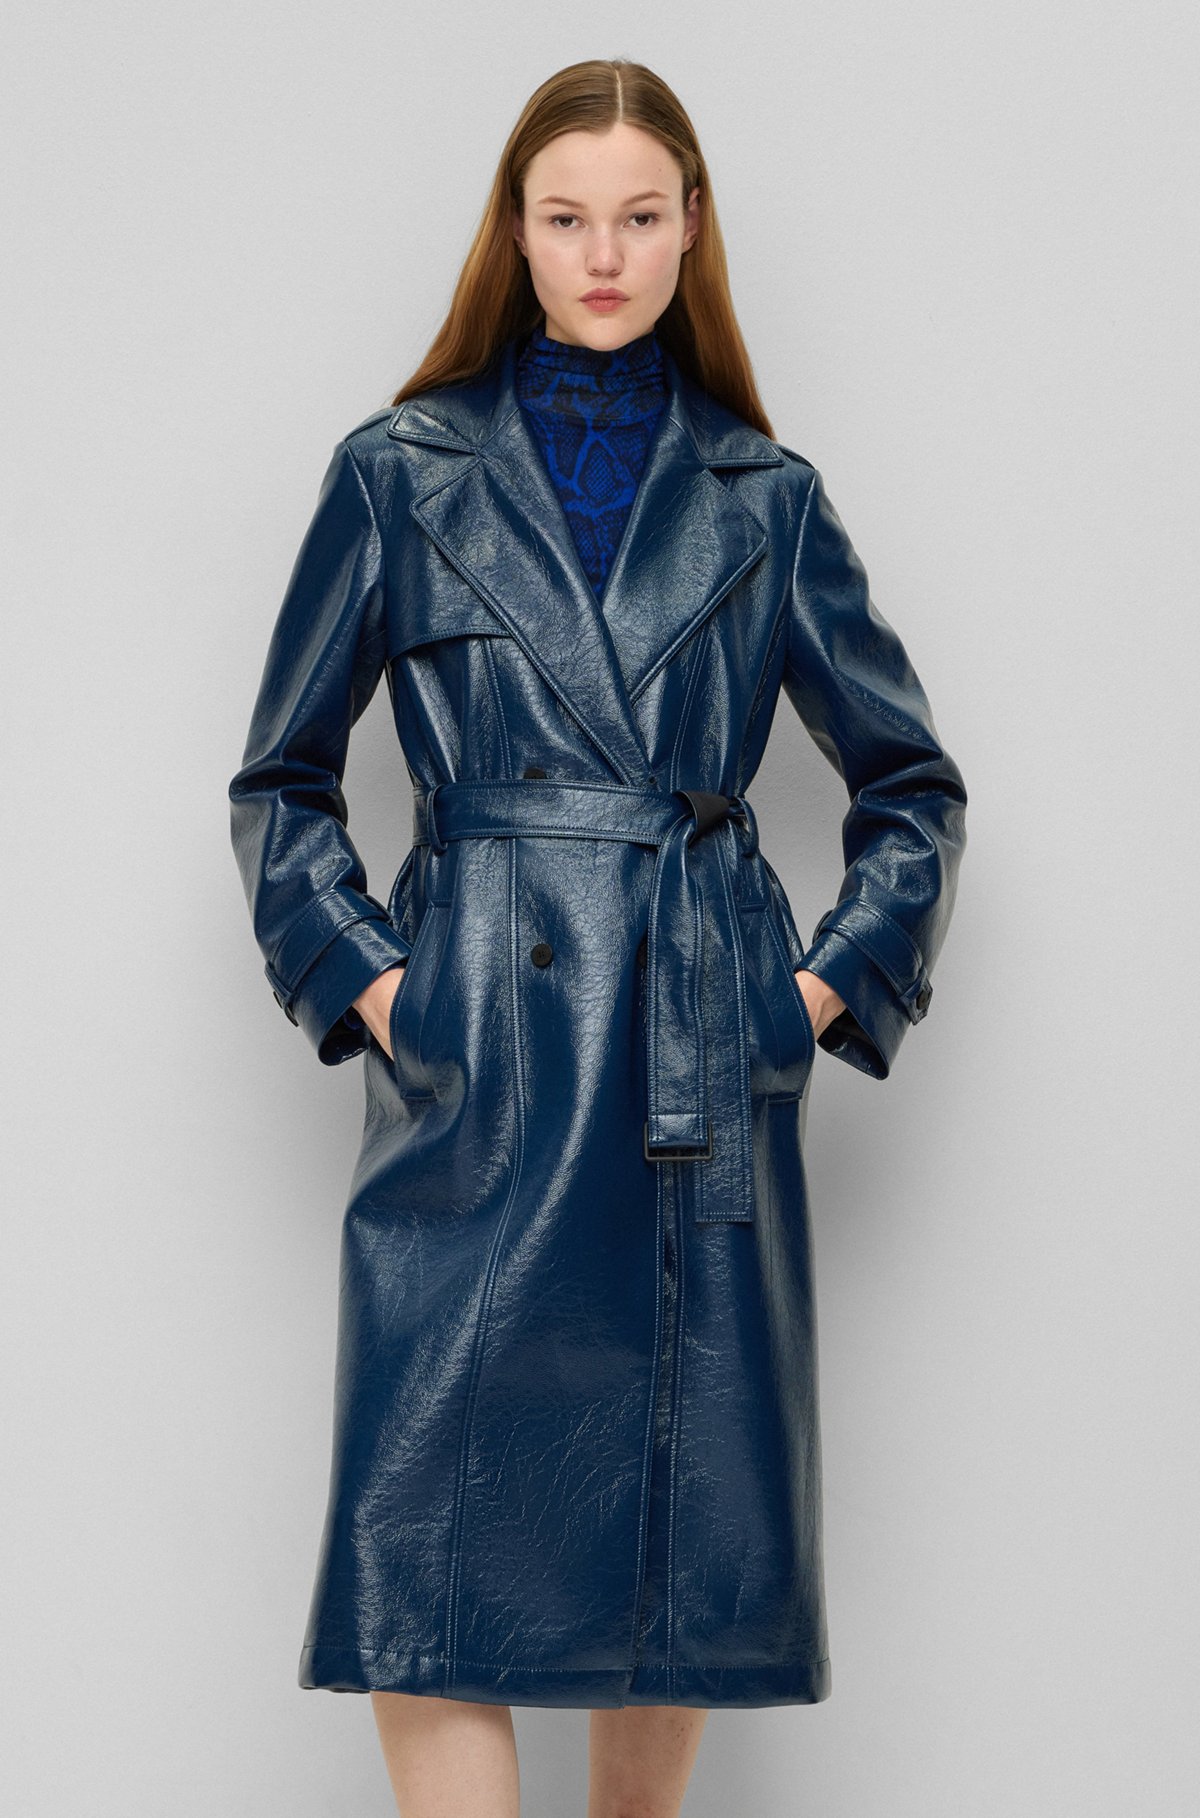 HUGO - Belted trench coat in lacquered faux leather